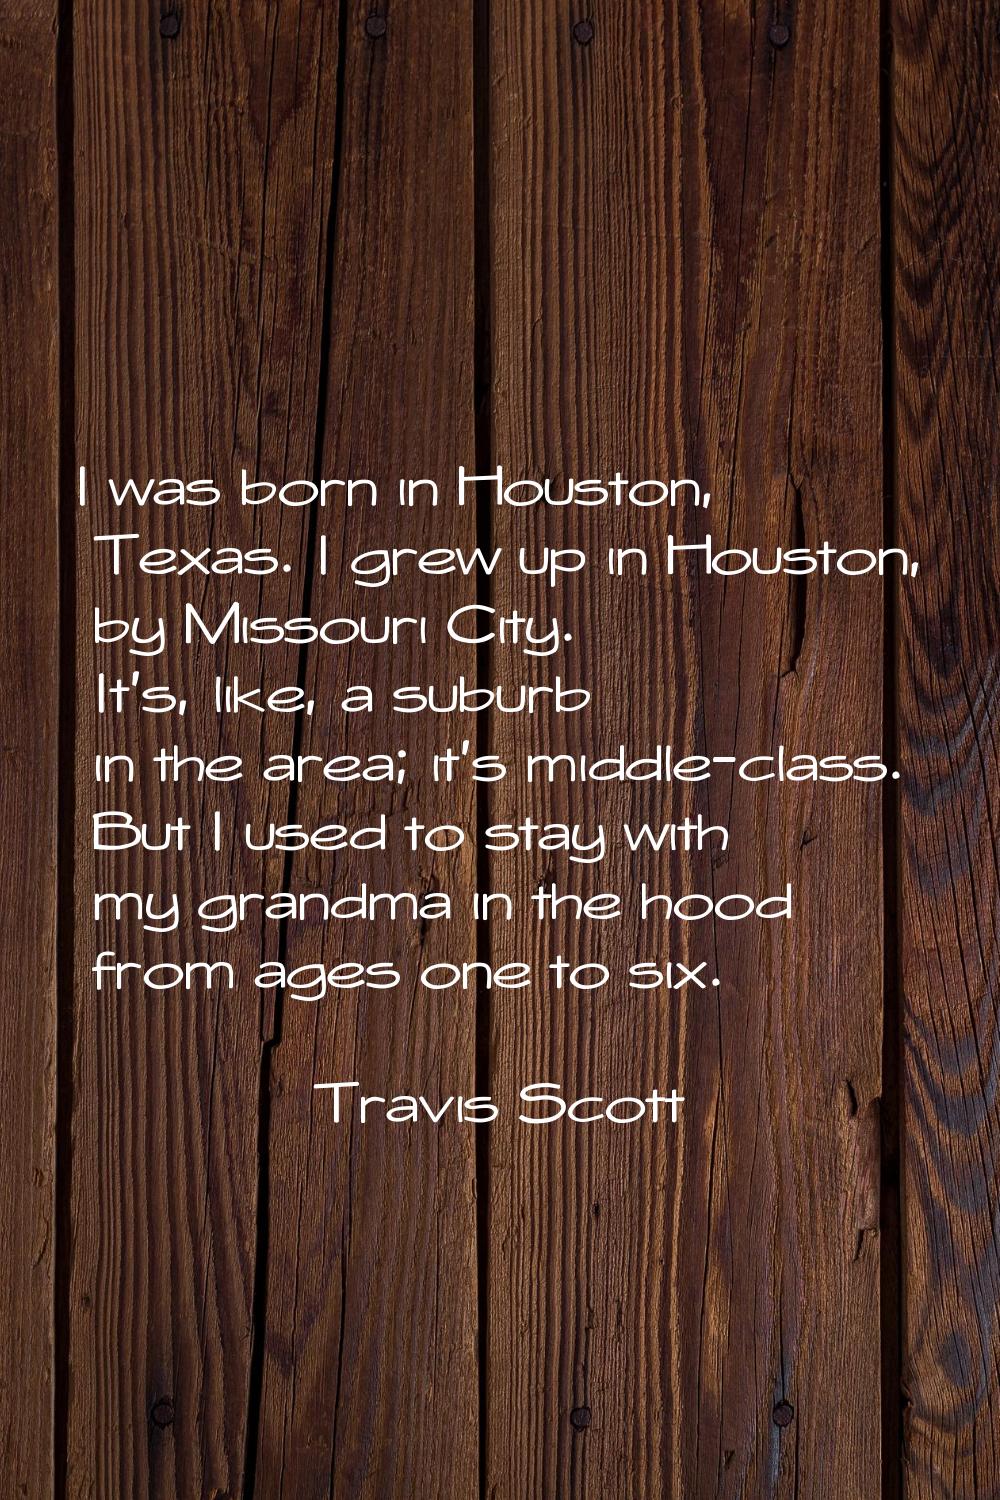 I was born in Houston, Texas. I grew up in Houston, by Missouri City. It's, like, a suburb in the a